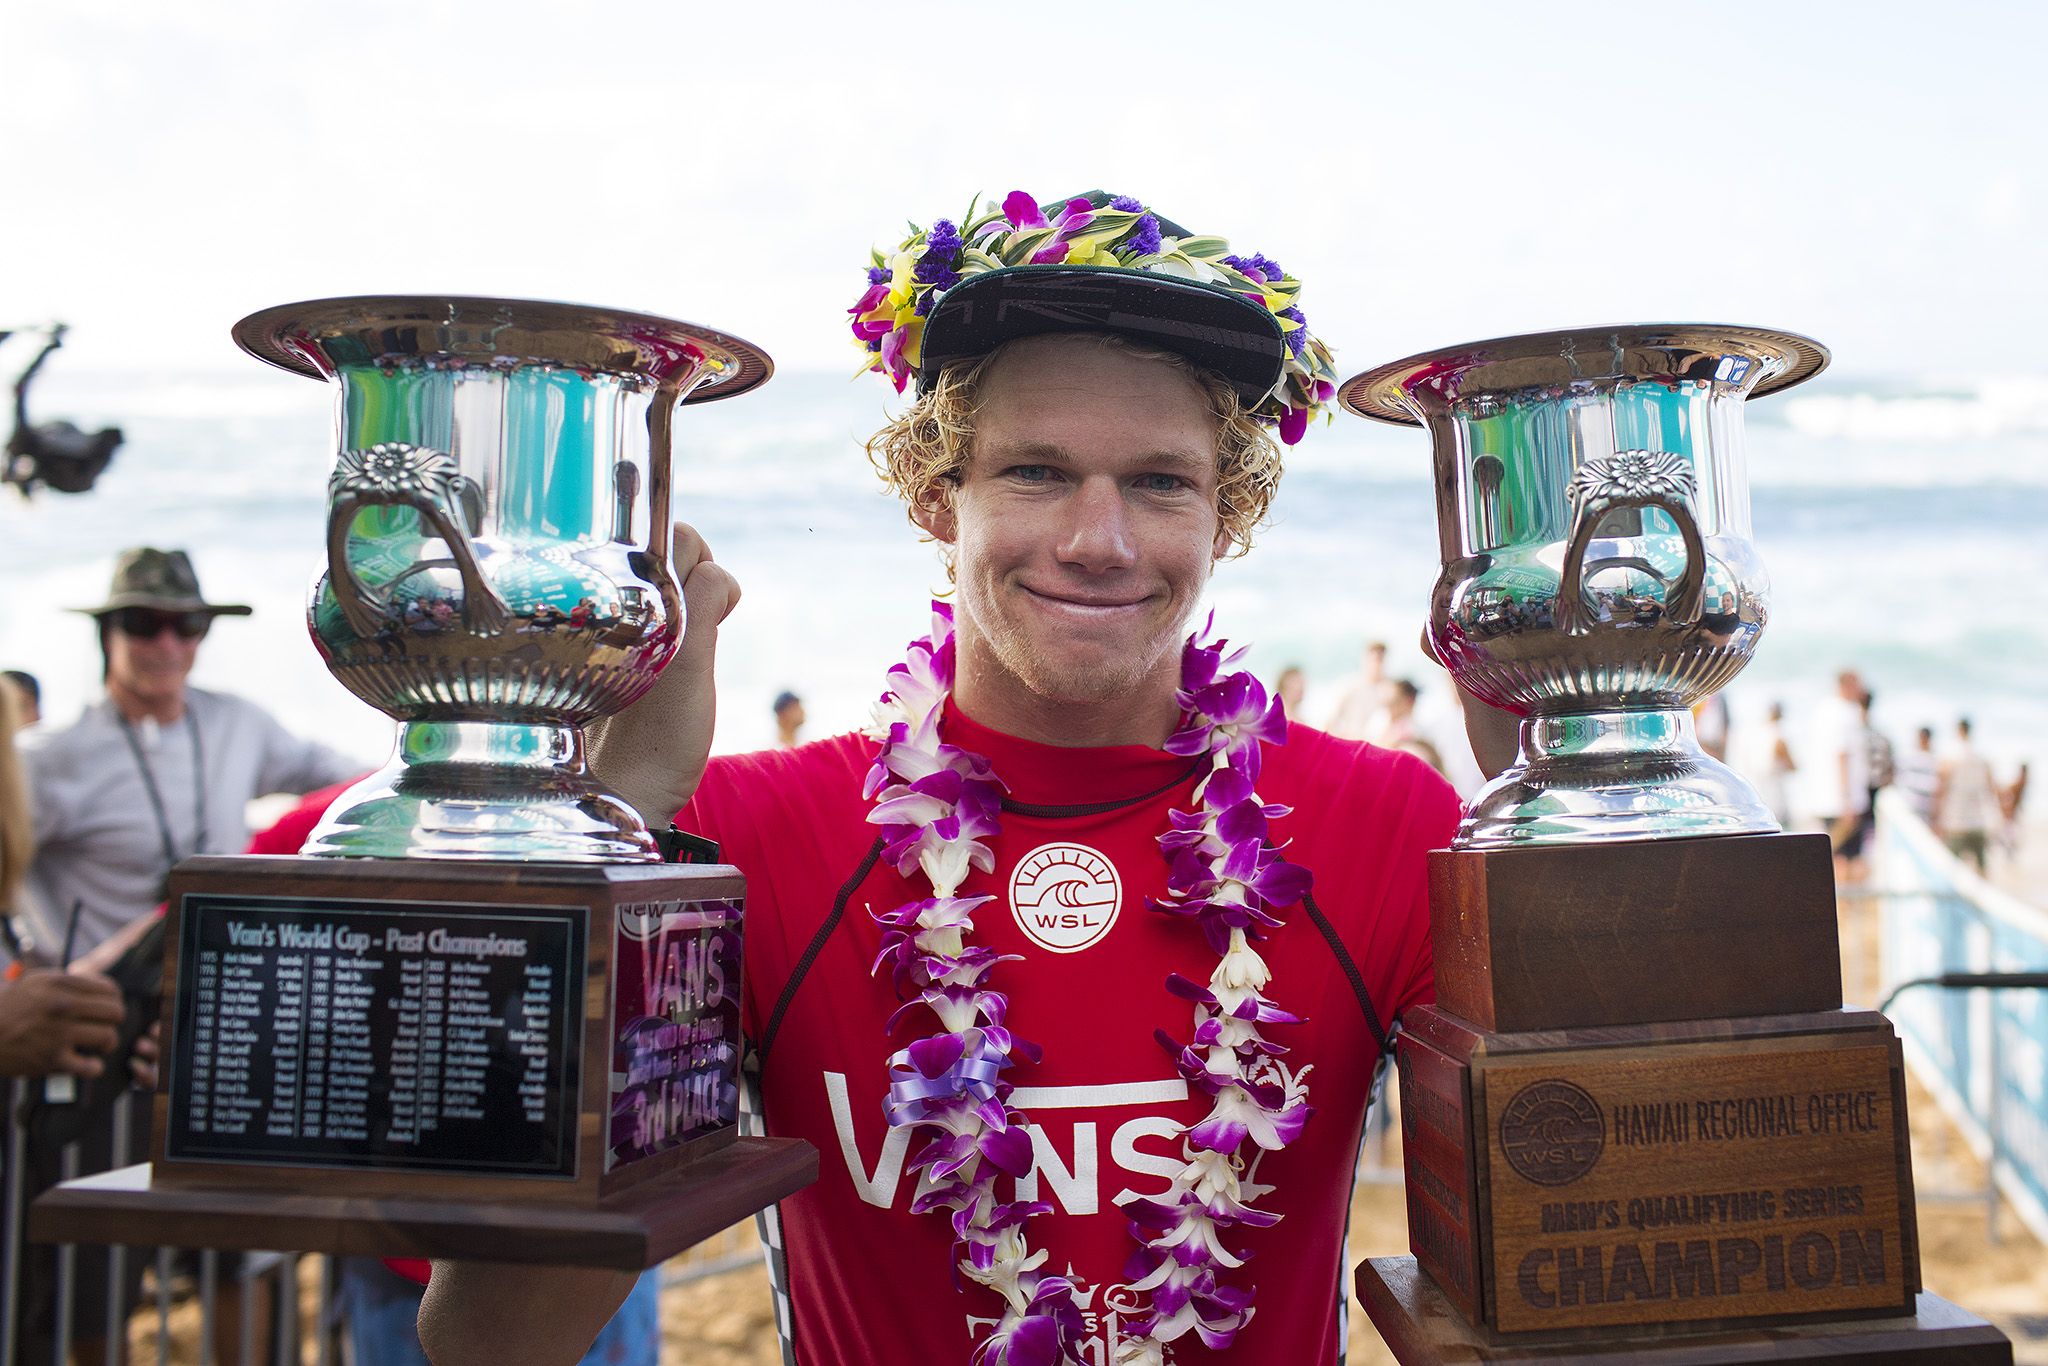 John John Florence of Hawaii (pictured) third place finish and Qualifying Series Regional Champion at the Vans World Cup of Surfing on December 3, 2015.